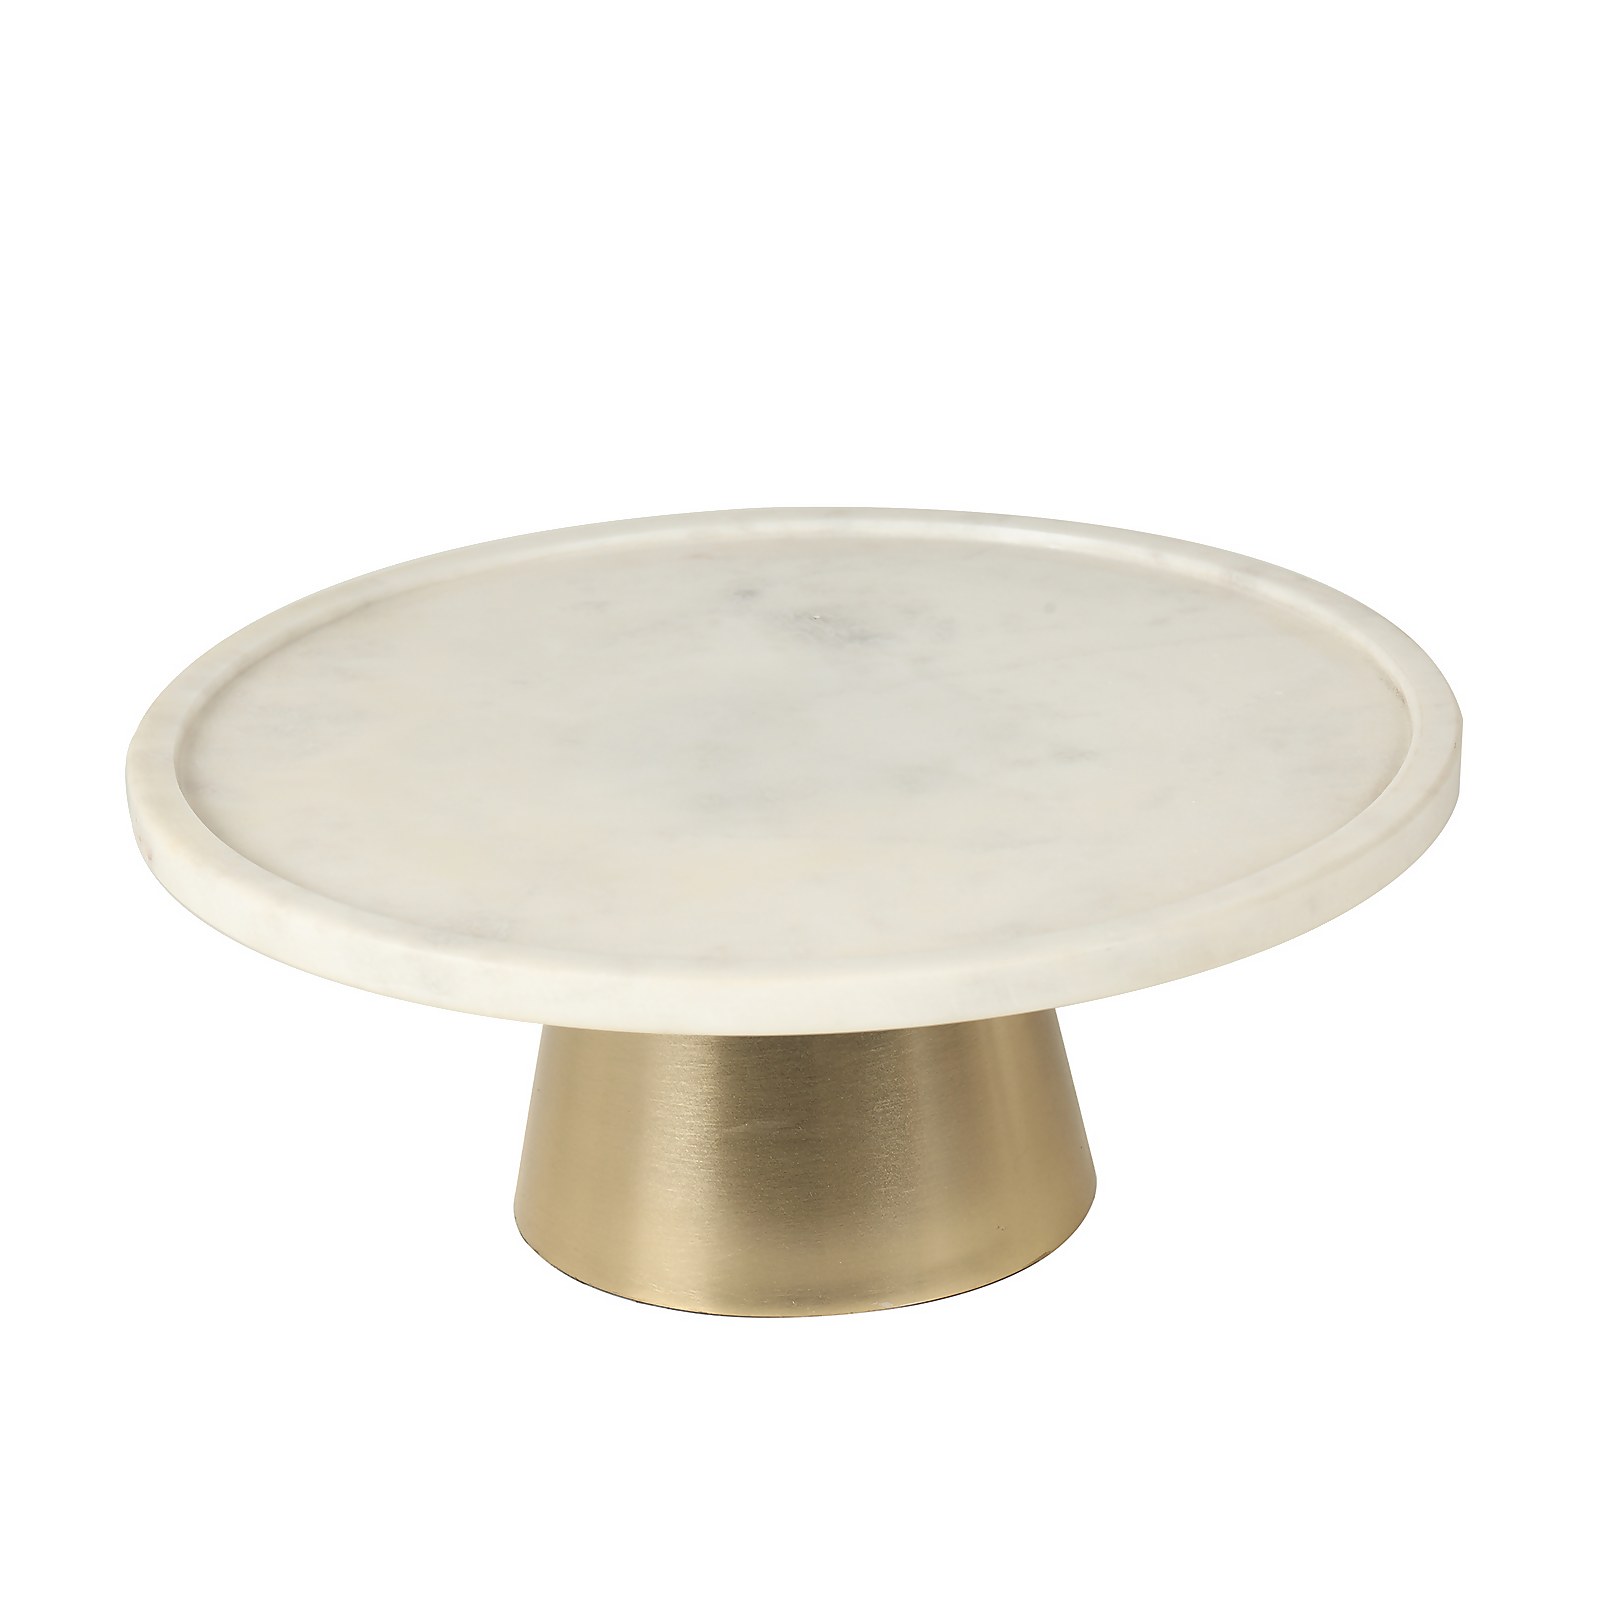 Photo of Marble & Iron Cake Stand